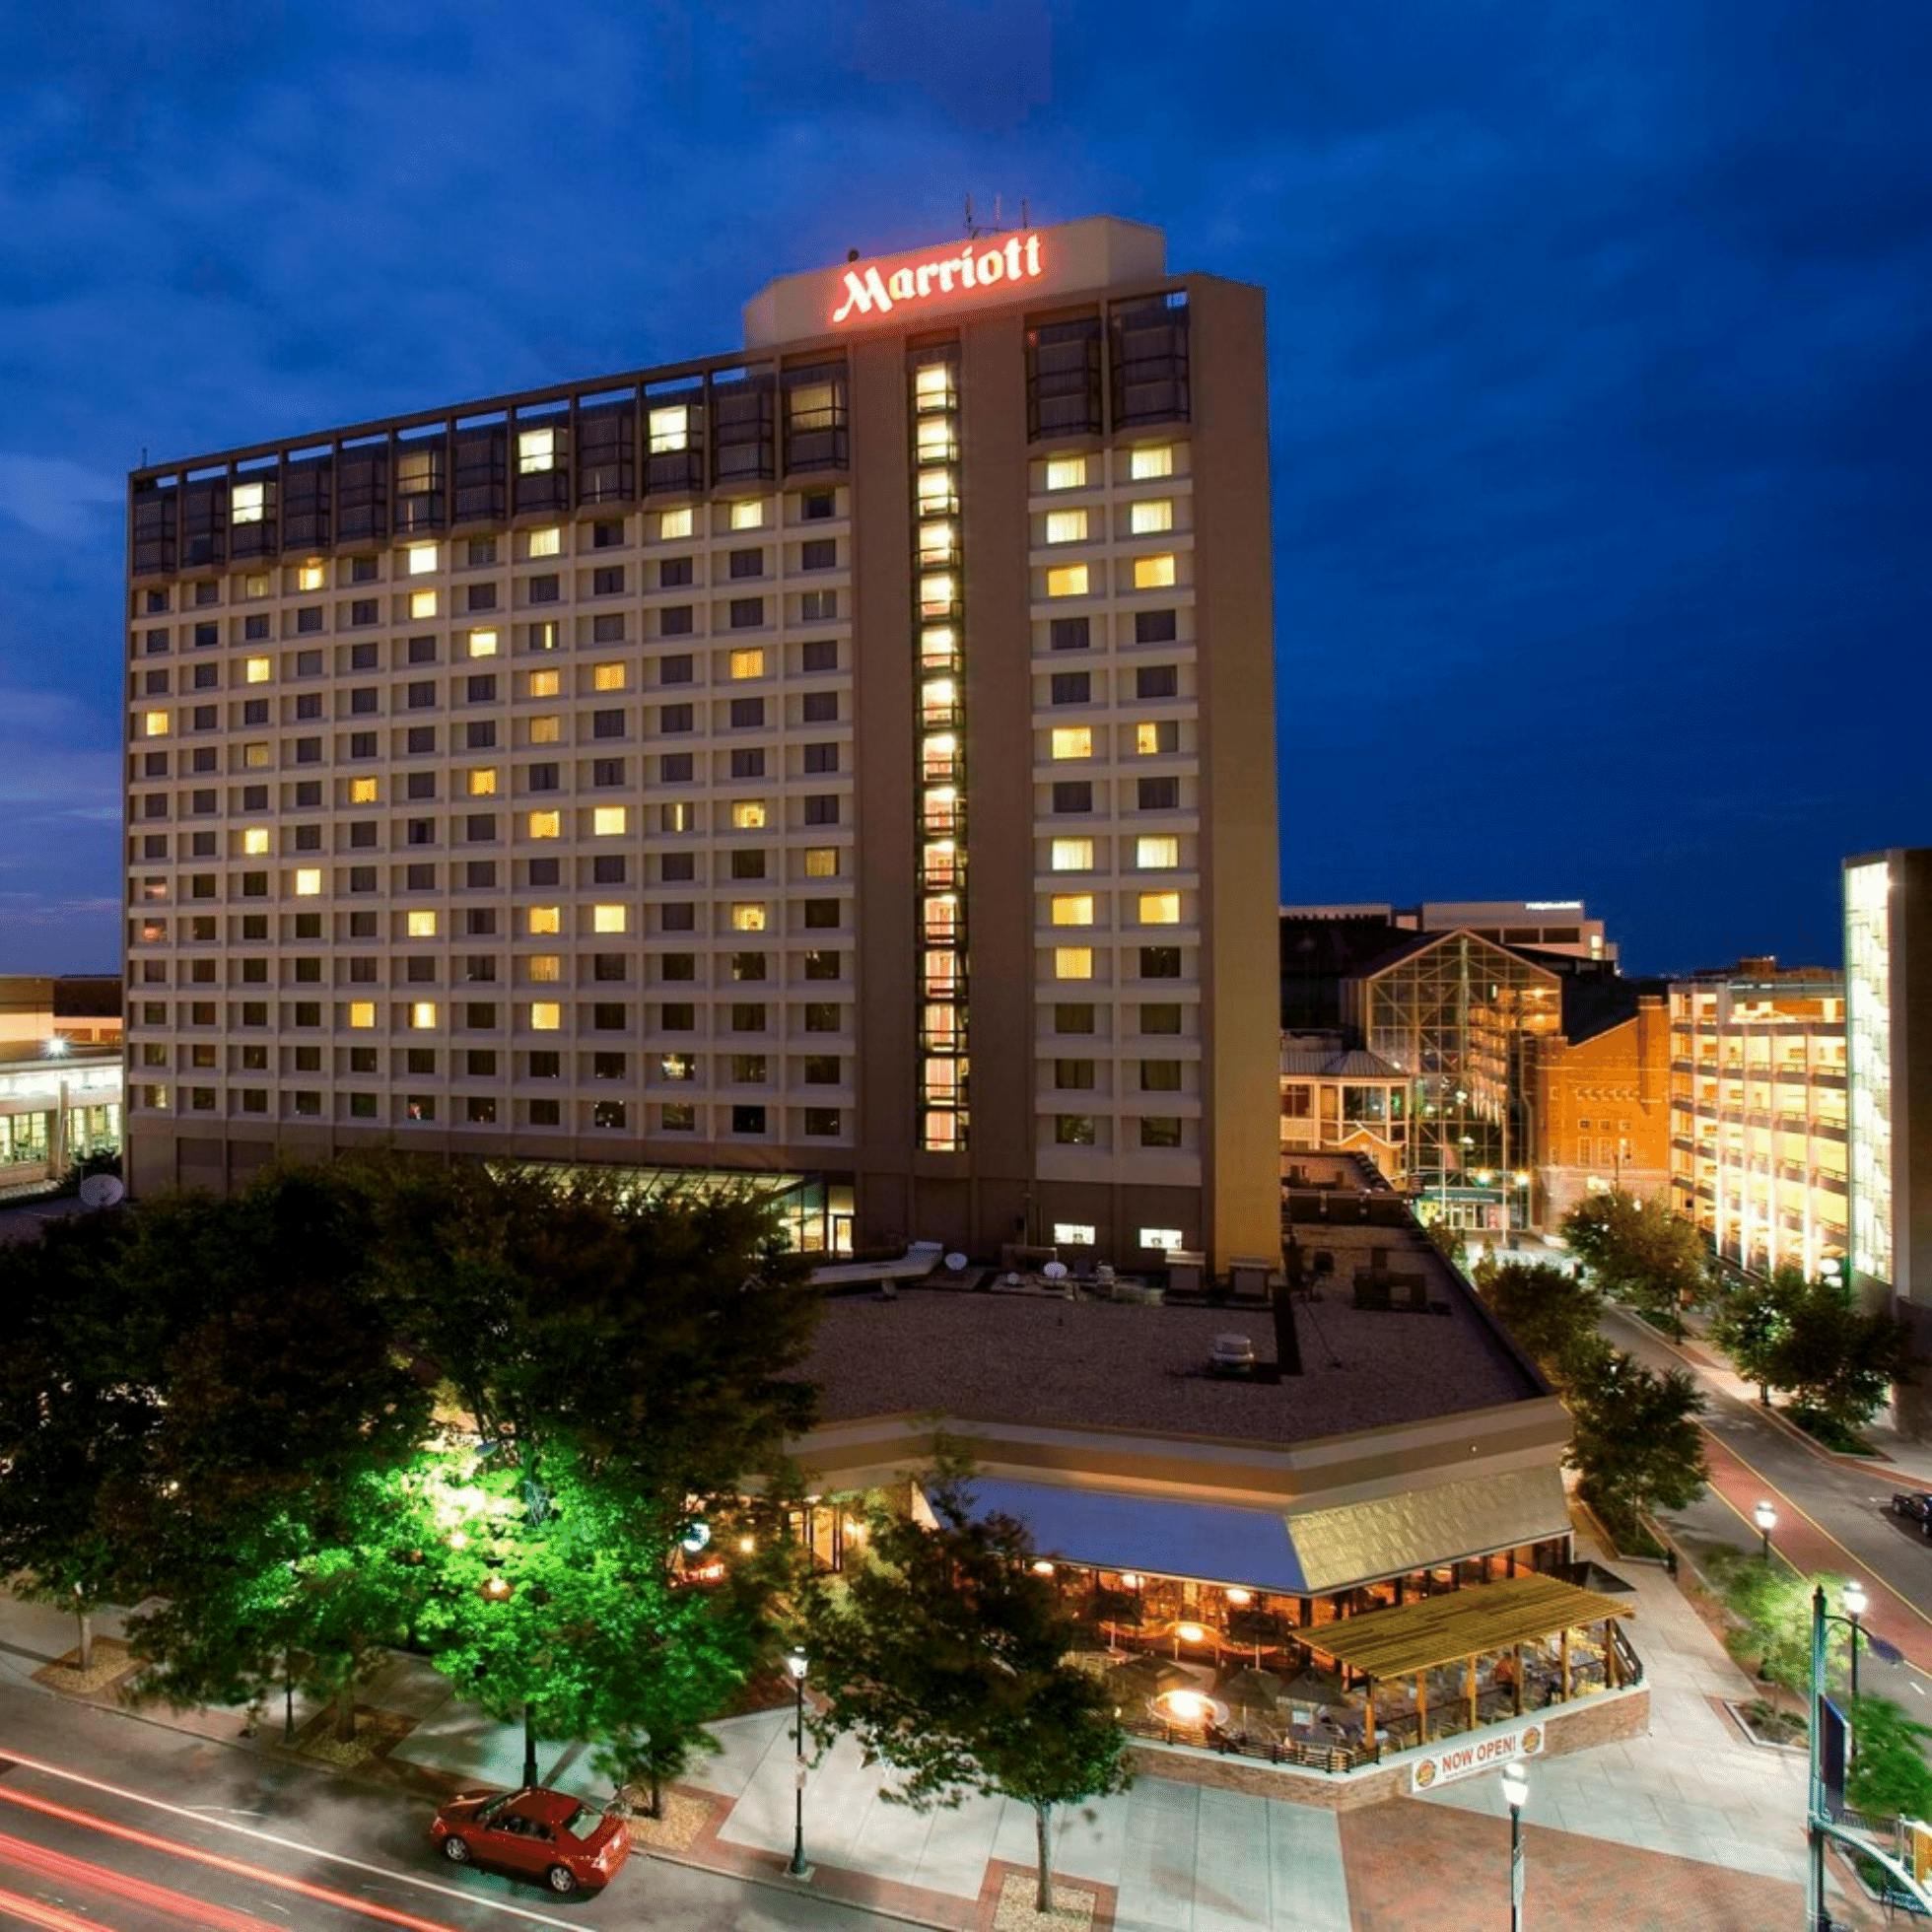 The 15 Best Hotels in Downtown Richmond